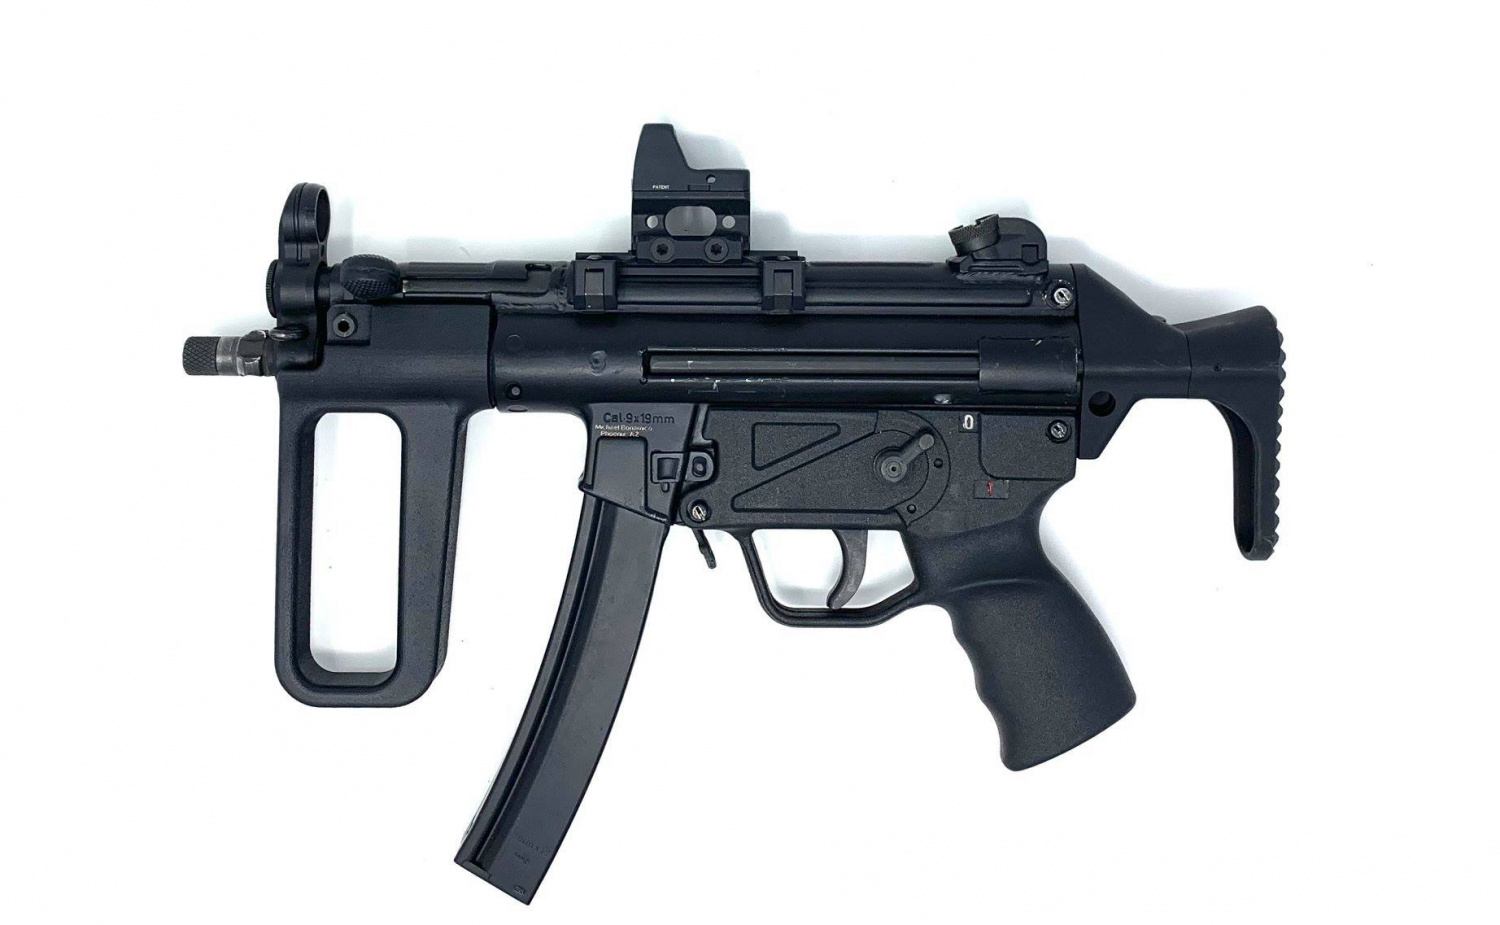 Below: Recreated it from a photograph, you can now get the HK MP5K retro VF...